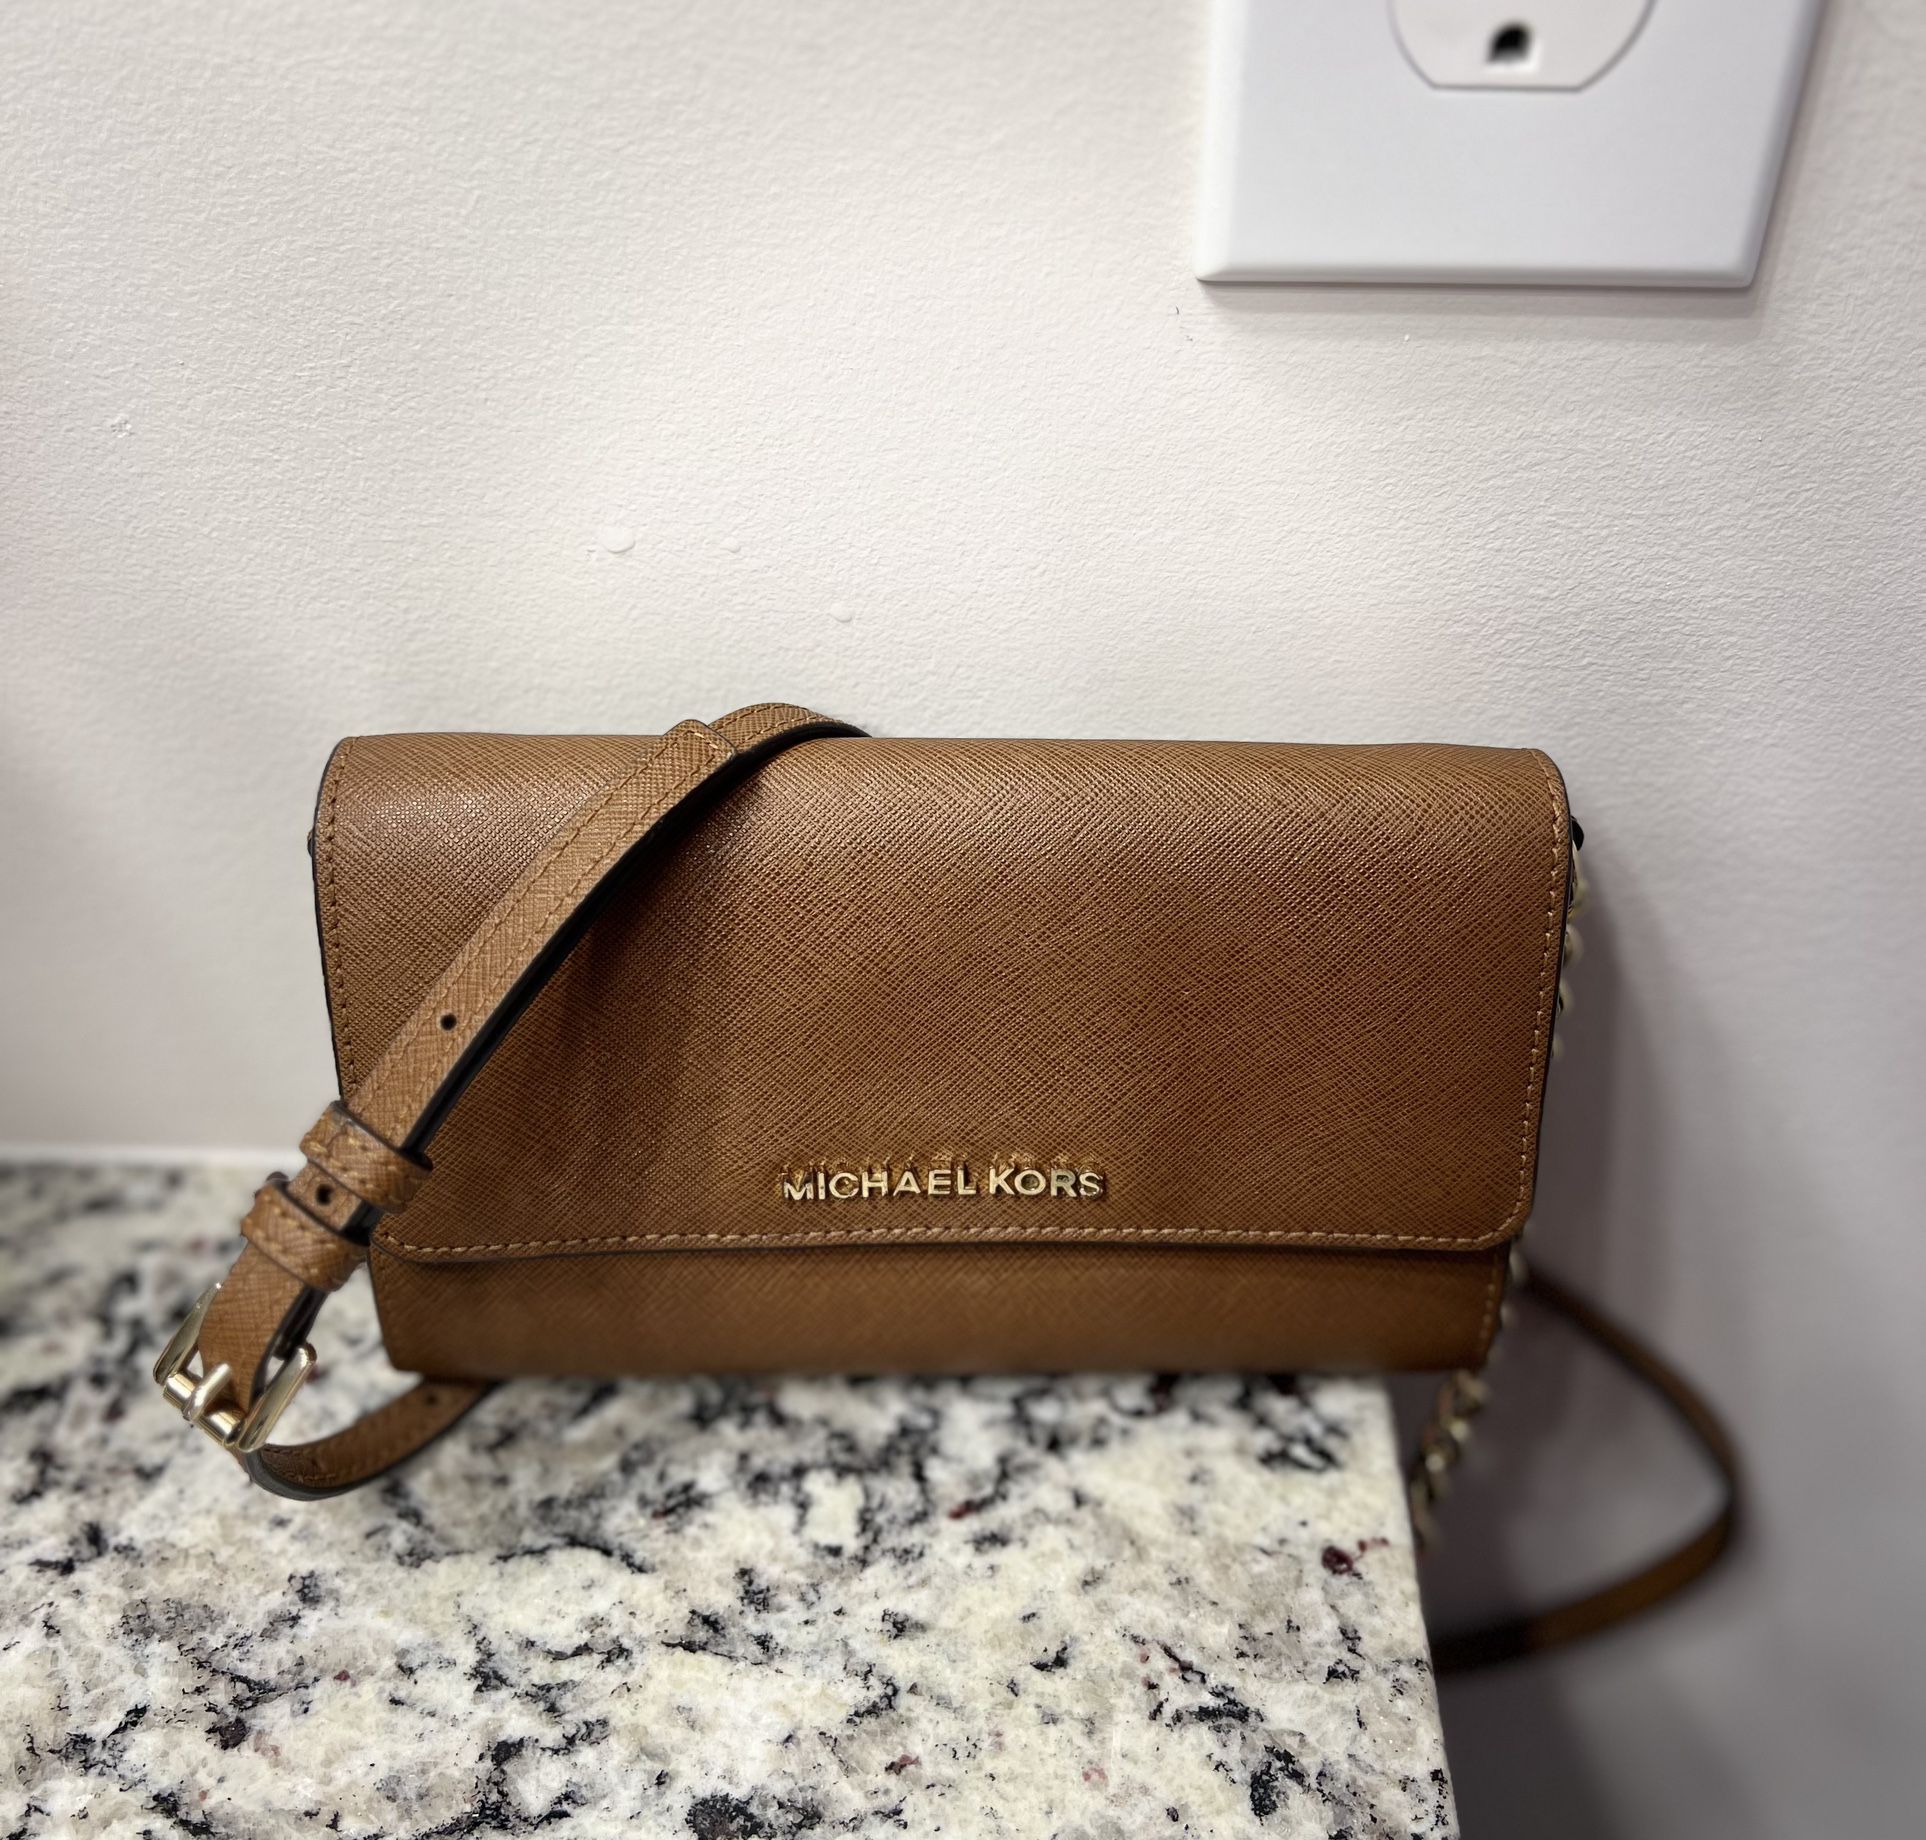 Michael Kors Chain Wallet for Sale in Union, KY - OfferUp